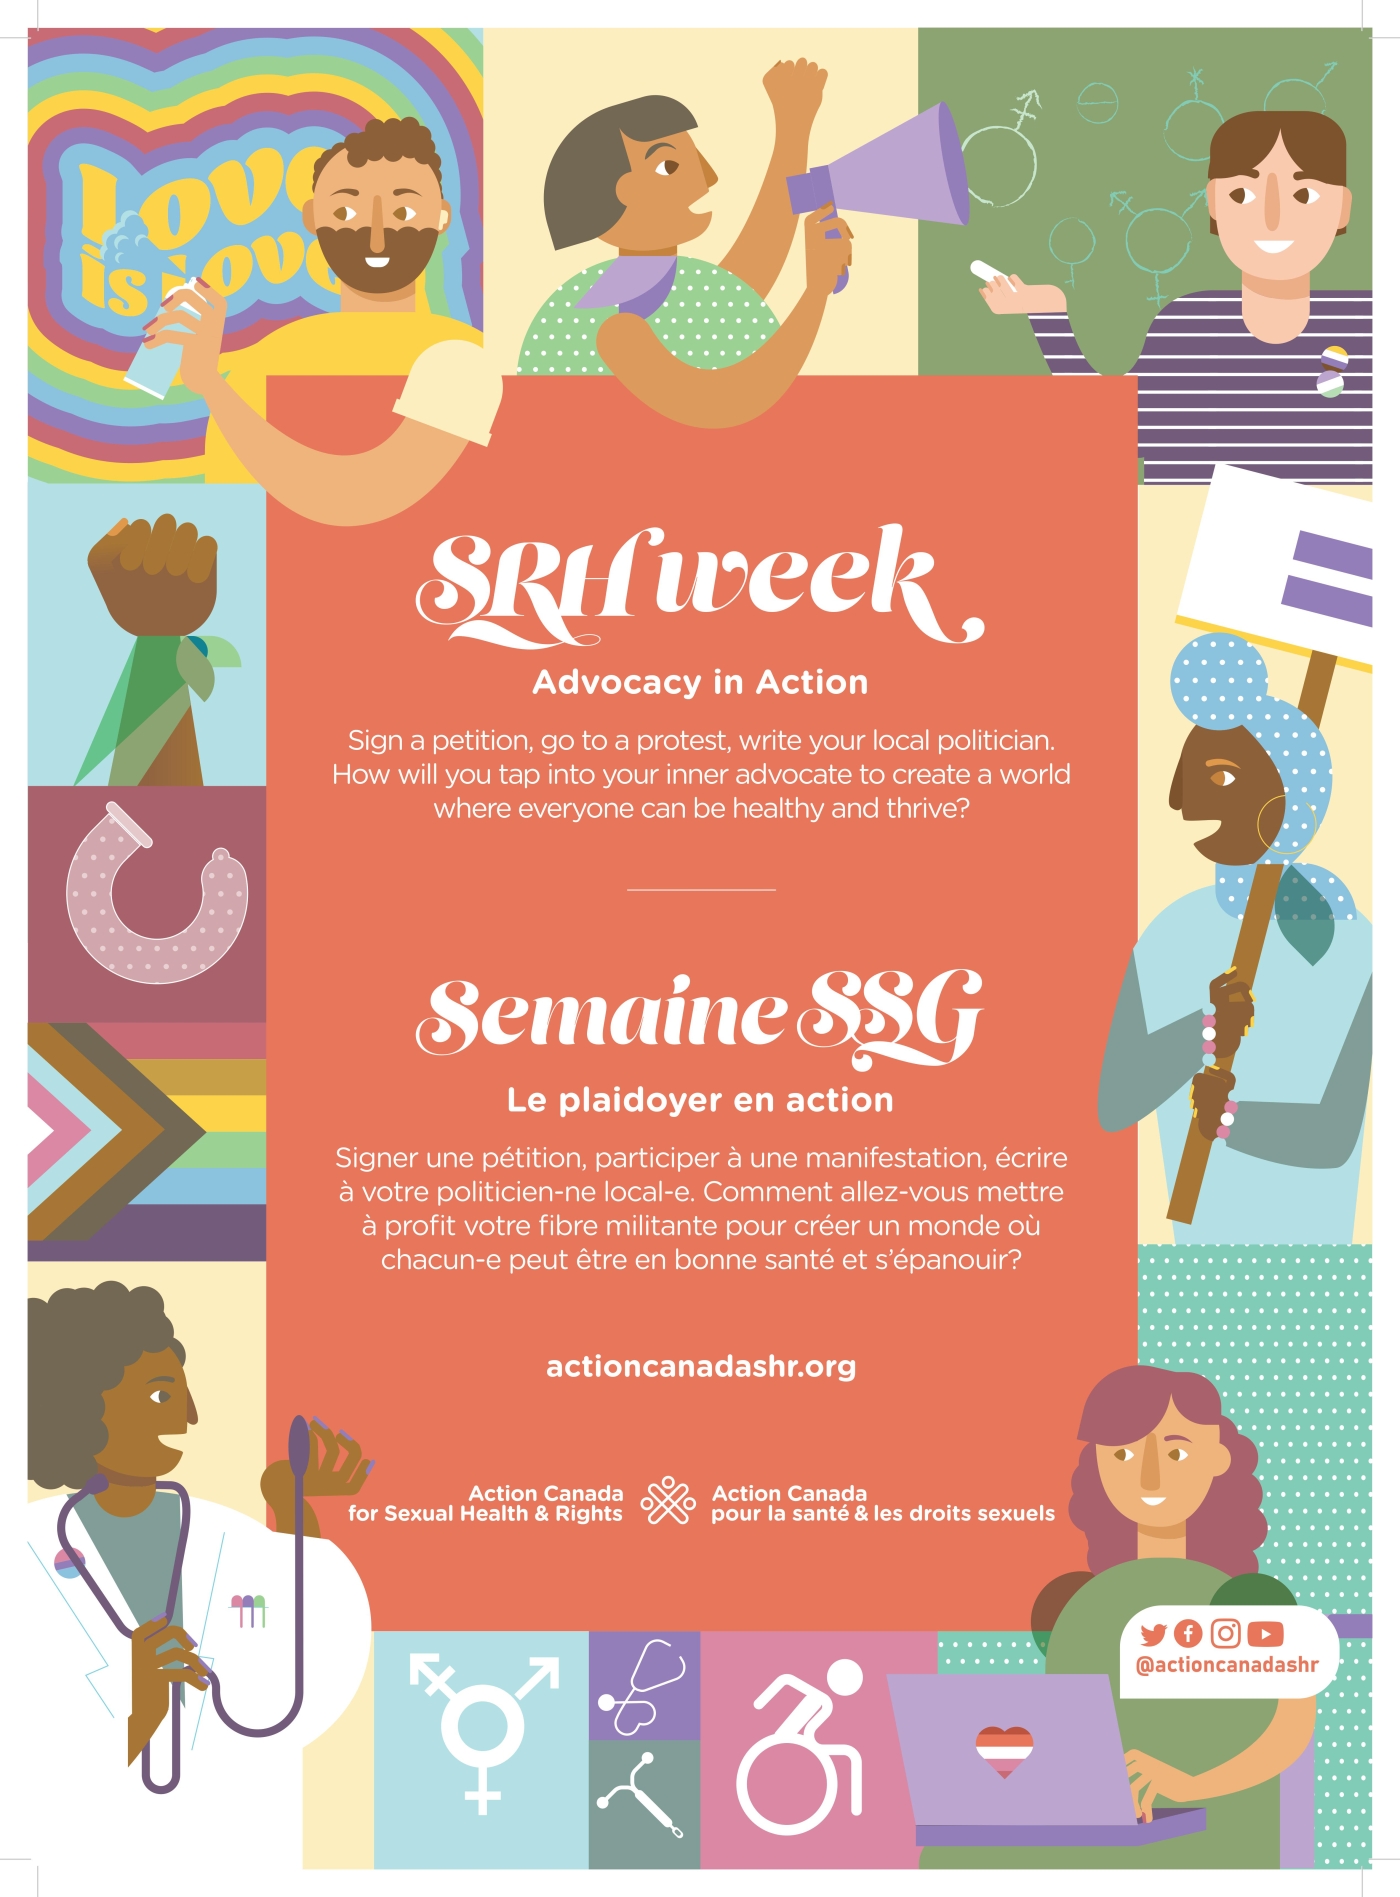 SRH Week 2022: Advocacy in Action poster